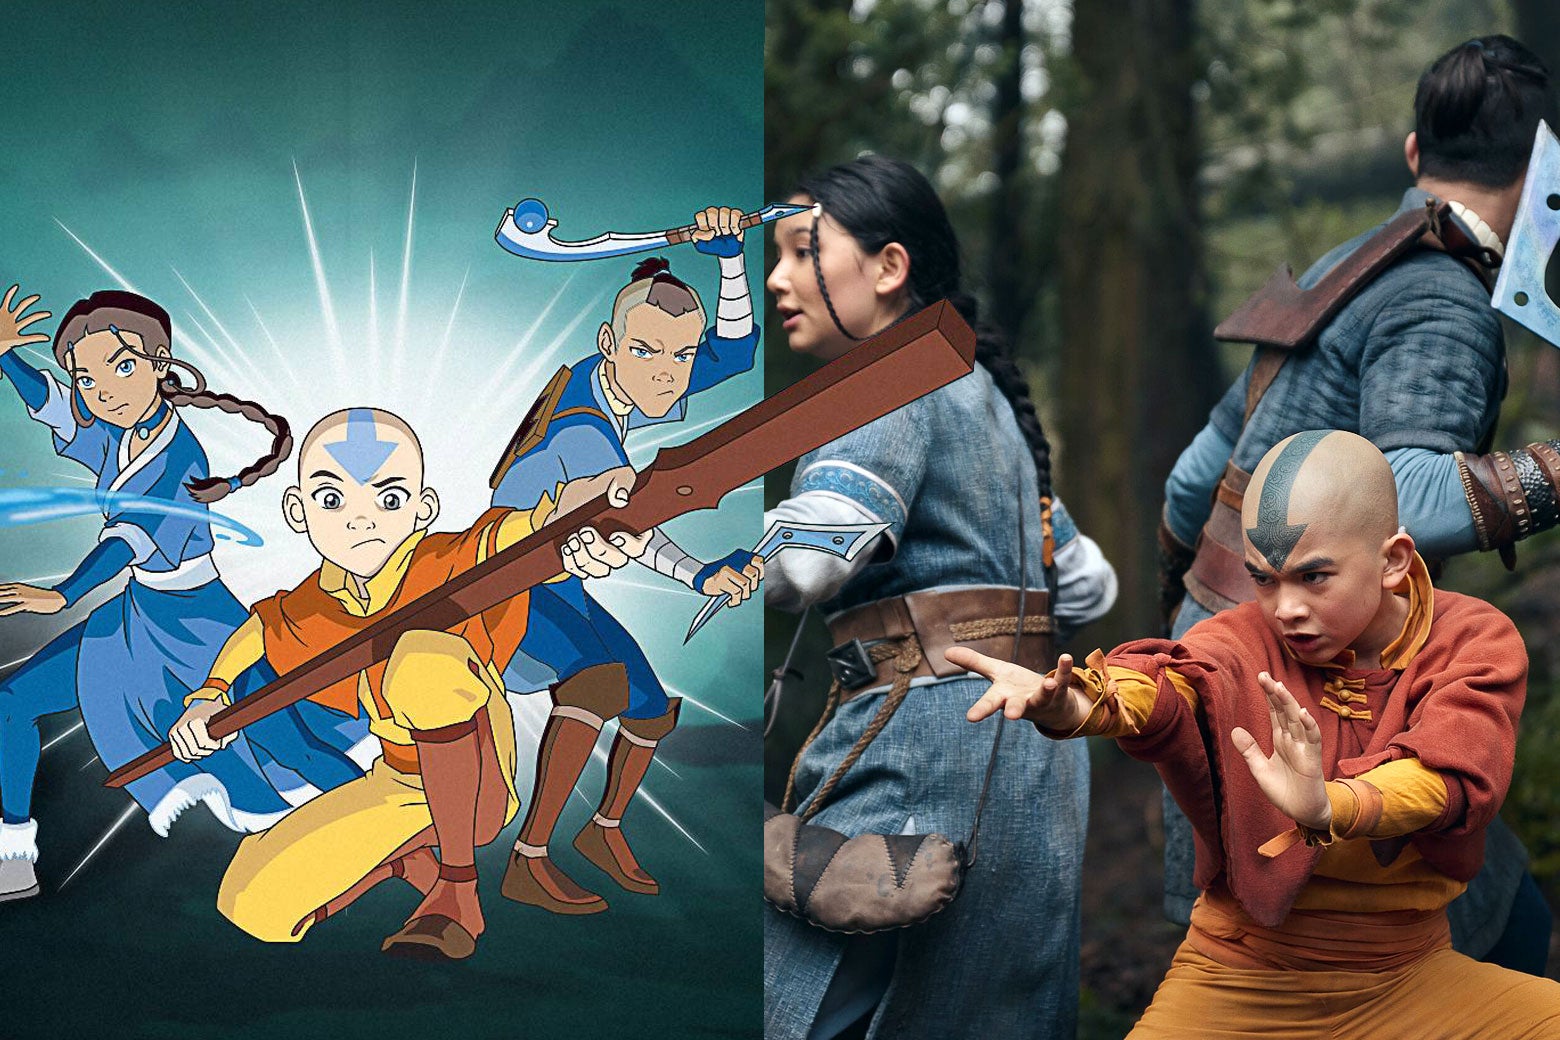 Left: Cartoon version of Katara, Aang, and Sokka in a fighting stance. Right: Live-action version of Katara, Aang, and Sokka in a fighting stance.